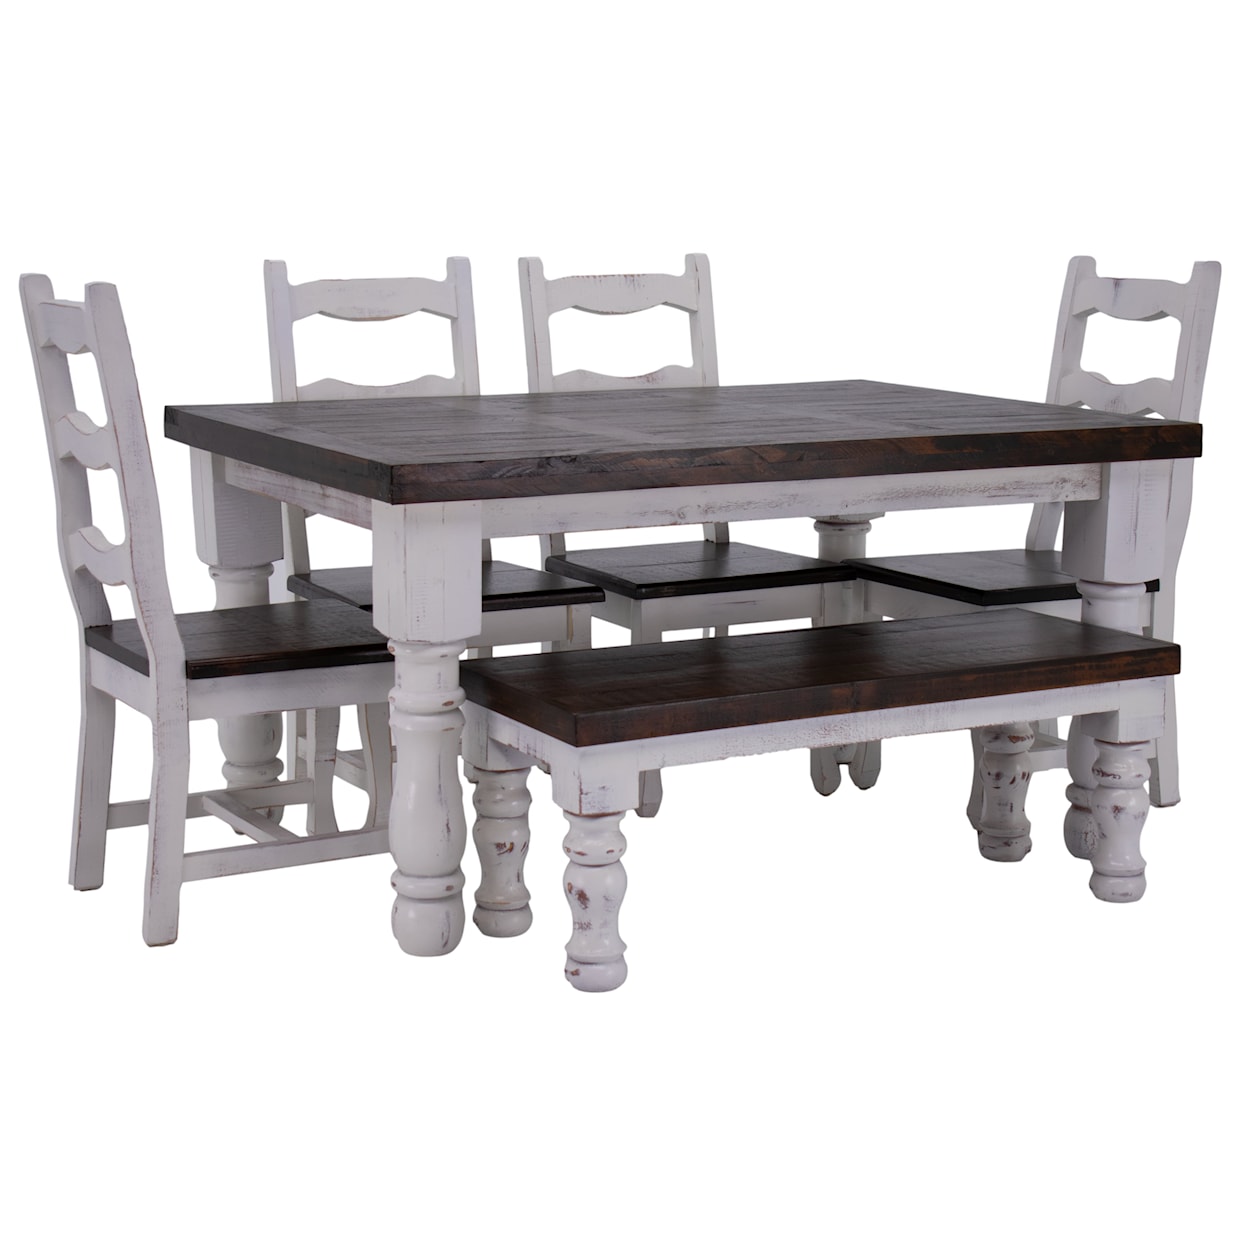 Vintage MANSION Mansion Dining Table, 4 Chairs & Bench